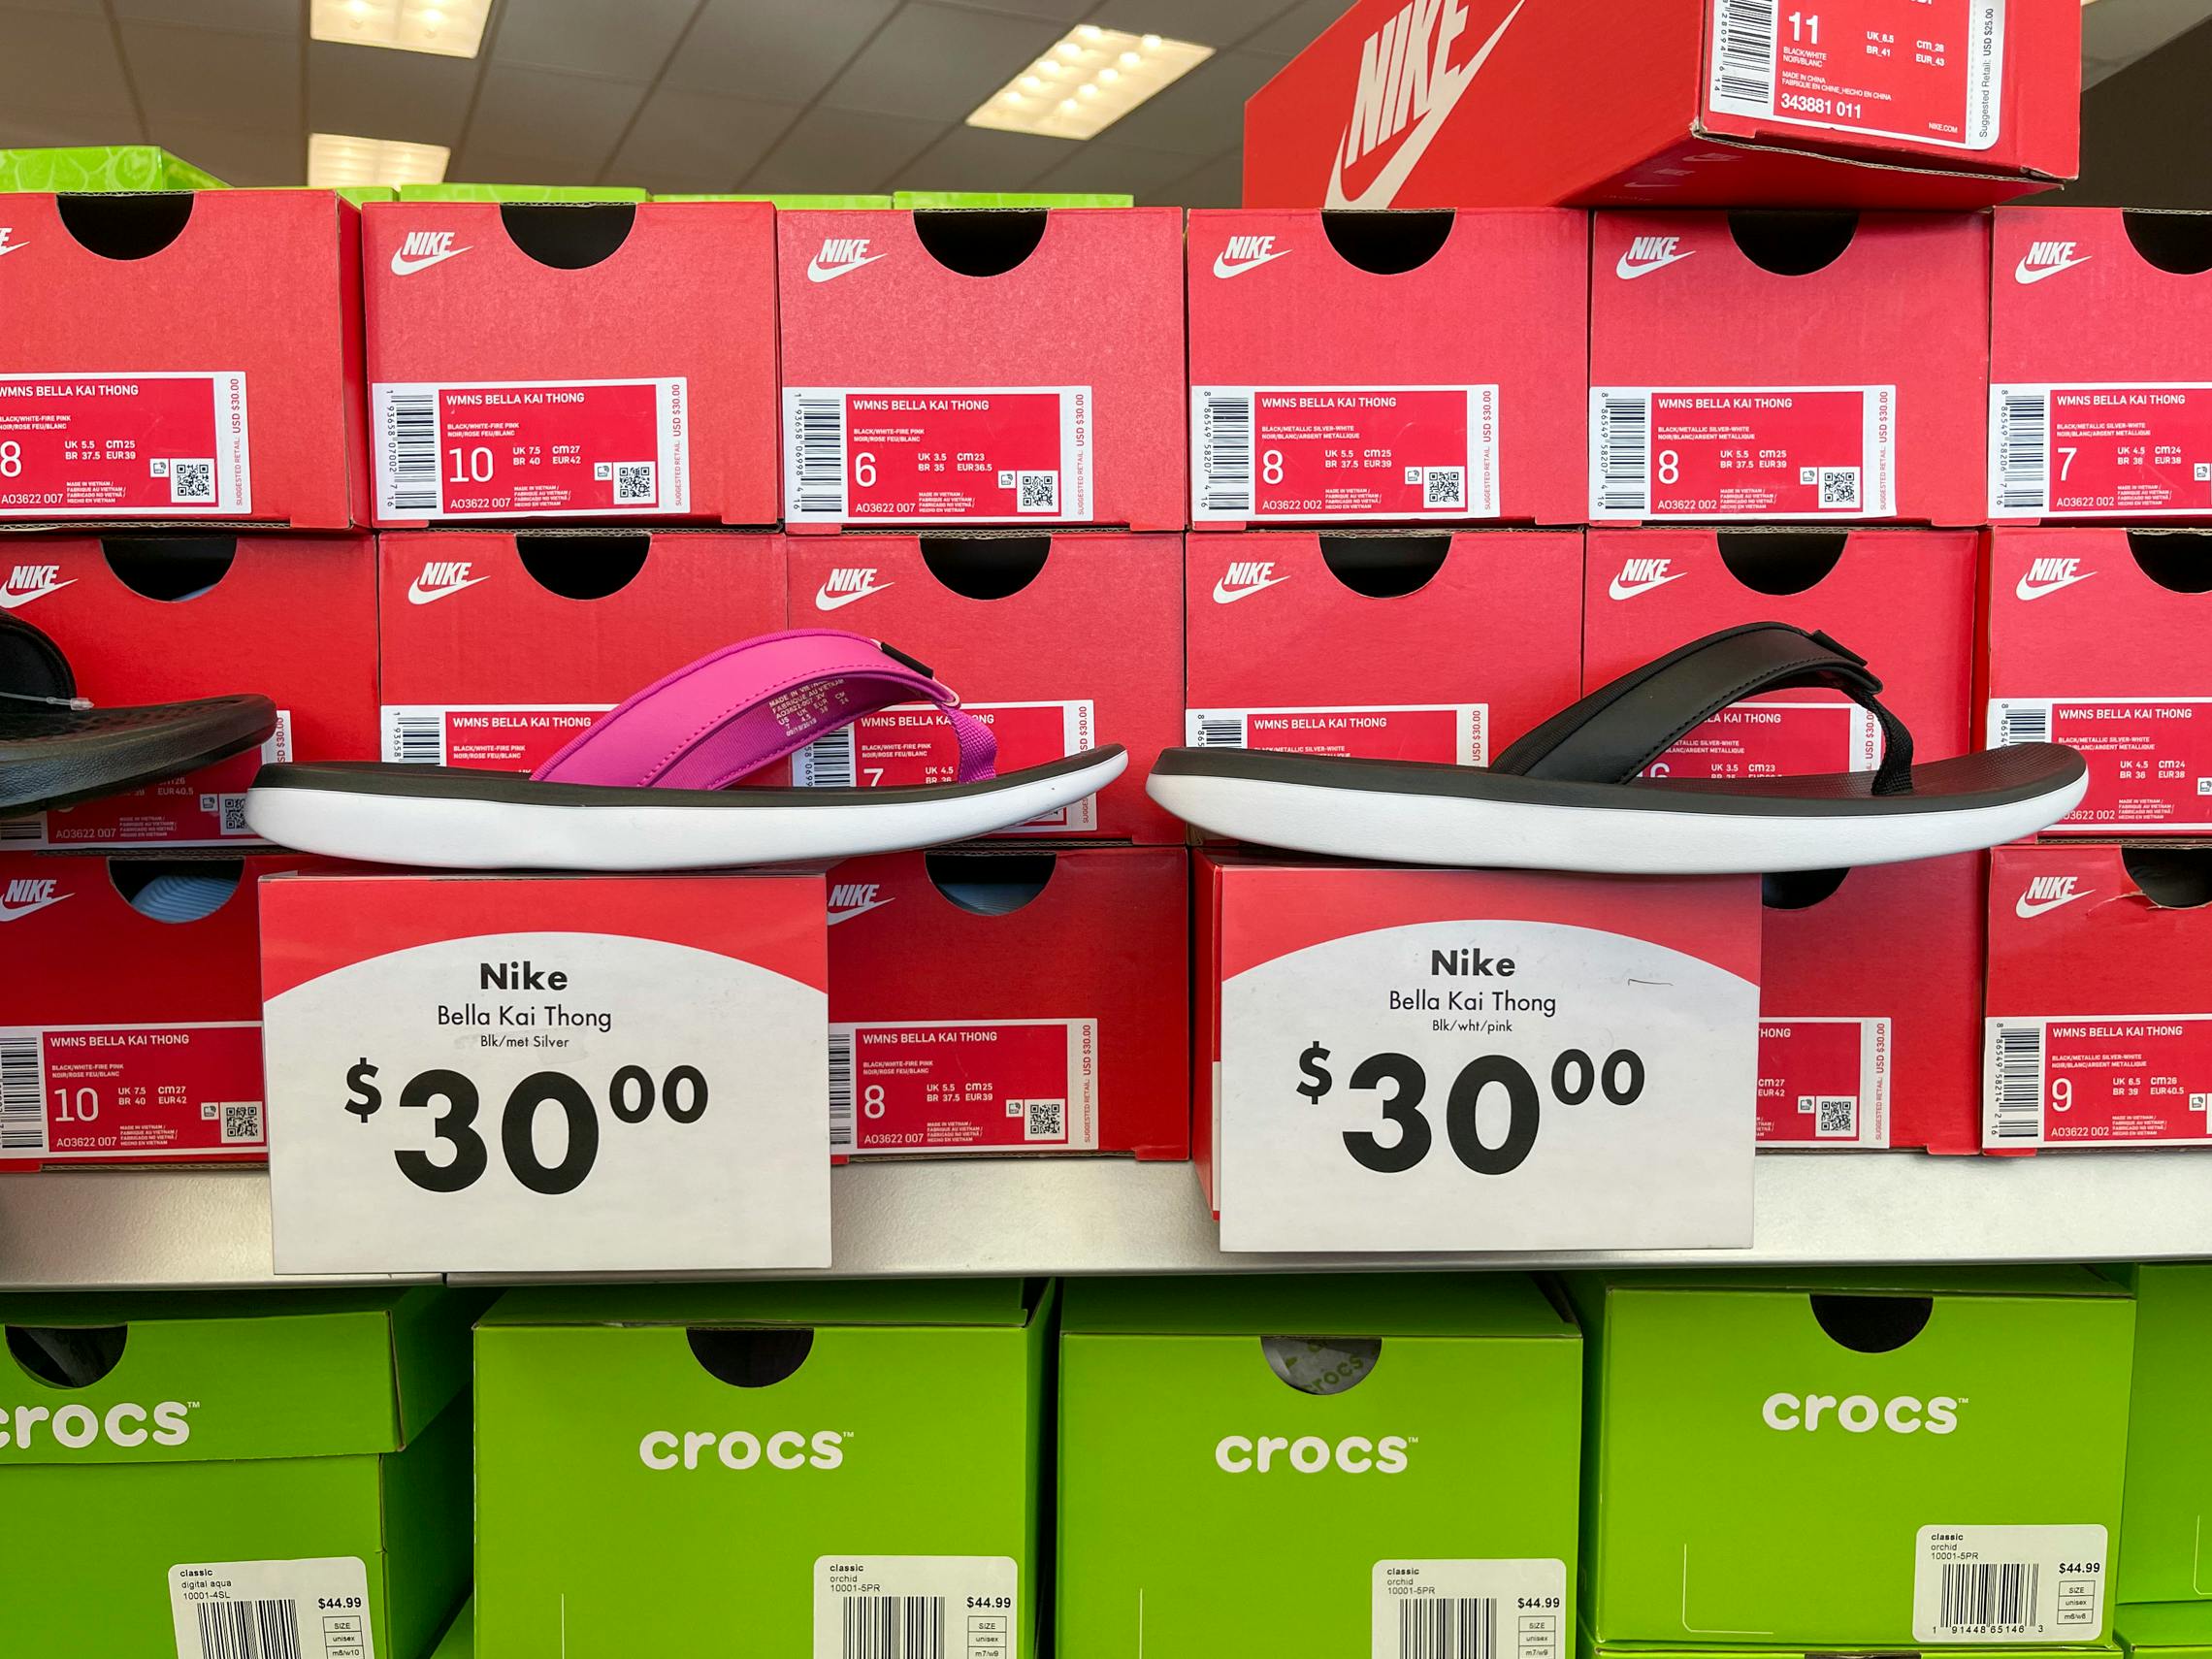 Nikes shoes with large red and white price tags reading $30.